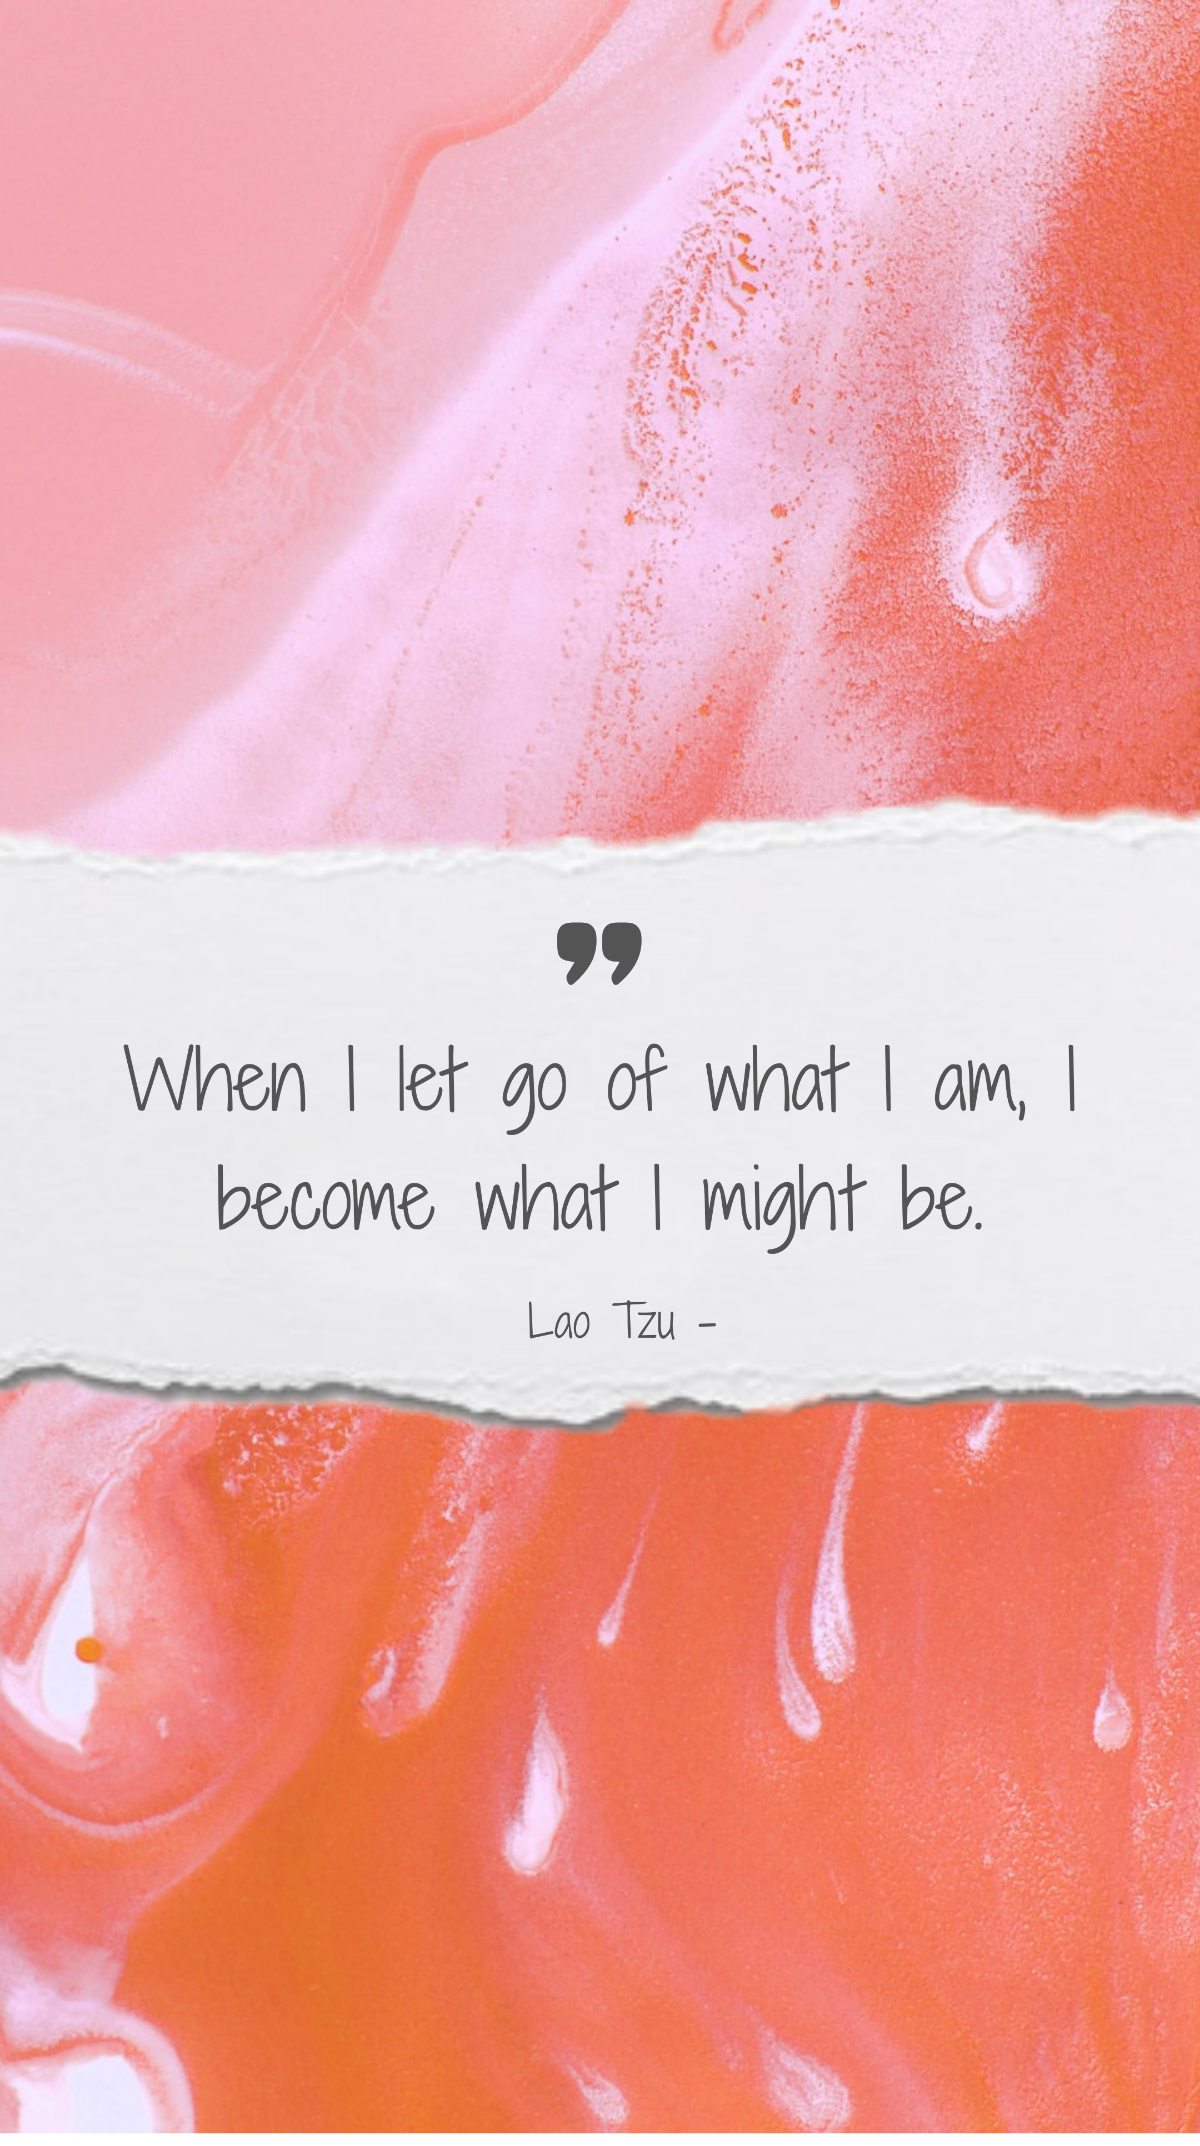 Lao Tzu - When I let go of what I am, I become what I might be. Template